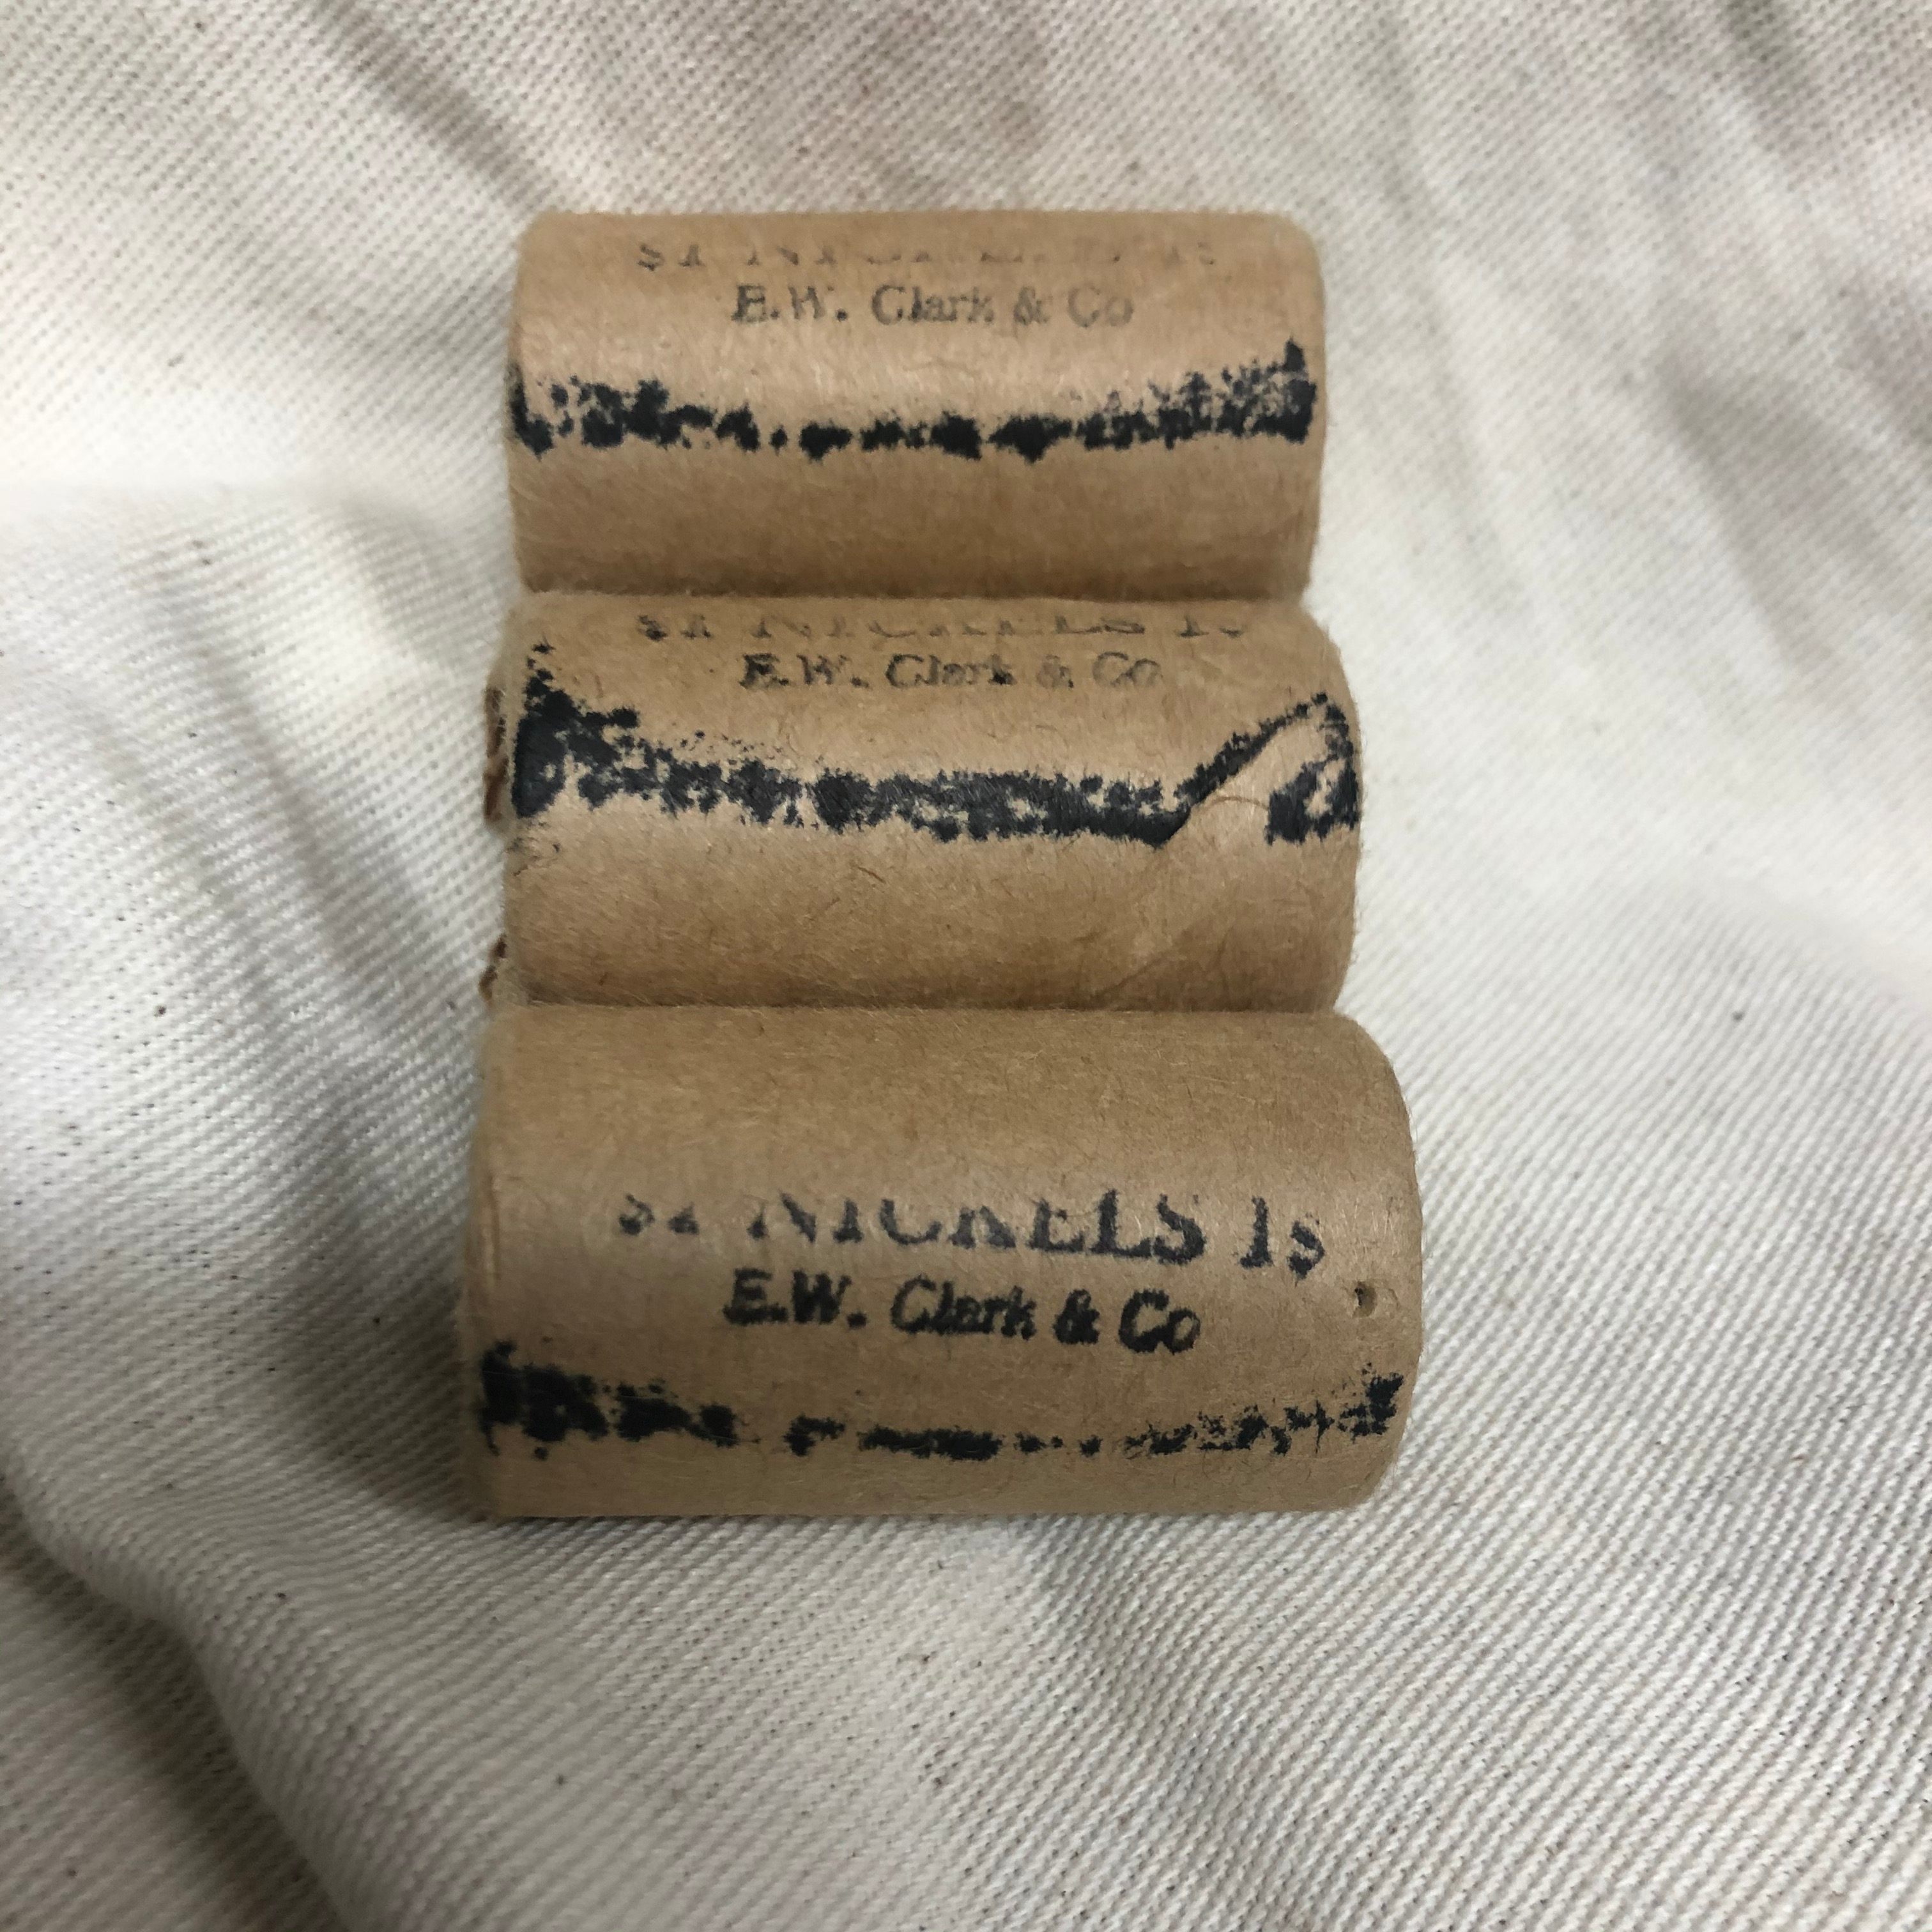 Buffalo nickel 1/2 rolls from E. W. Clark and Co. - Sealed rolls - Old and wonderful